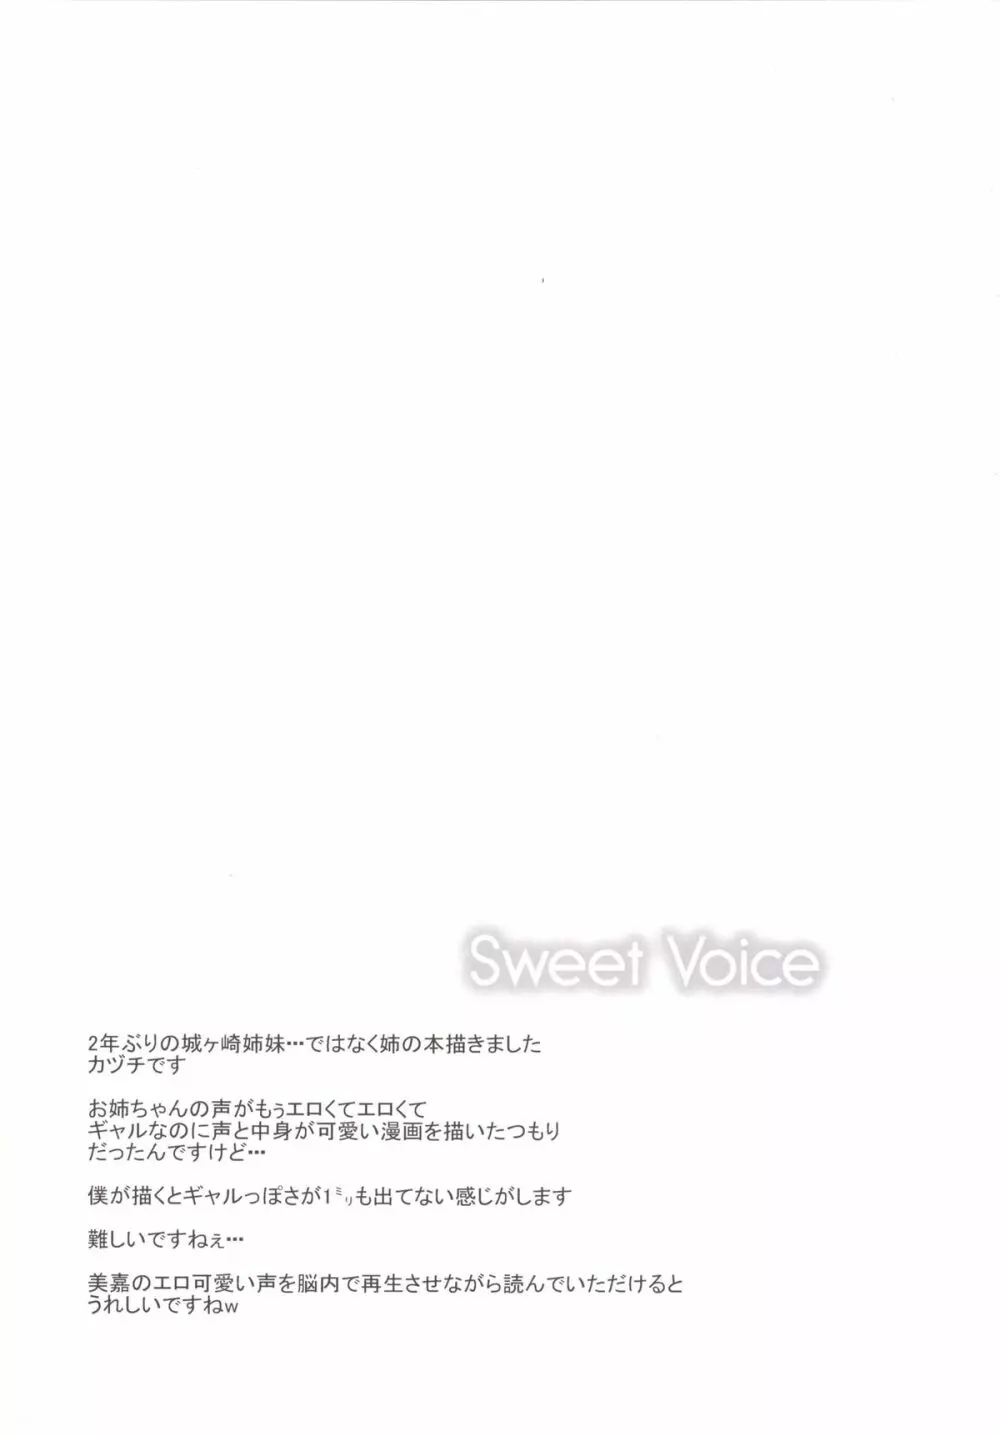 Sweet Voice Page.3